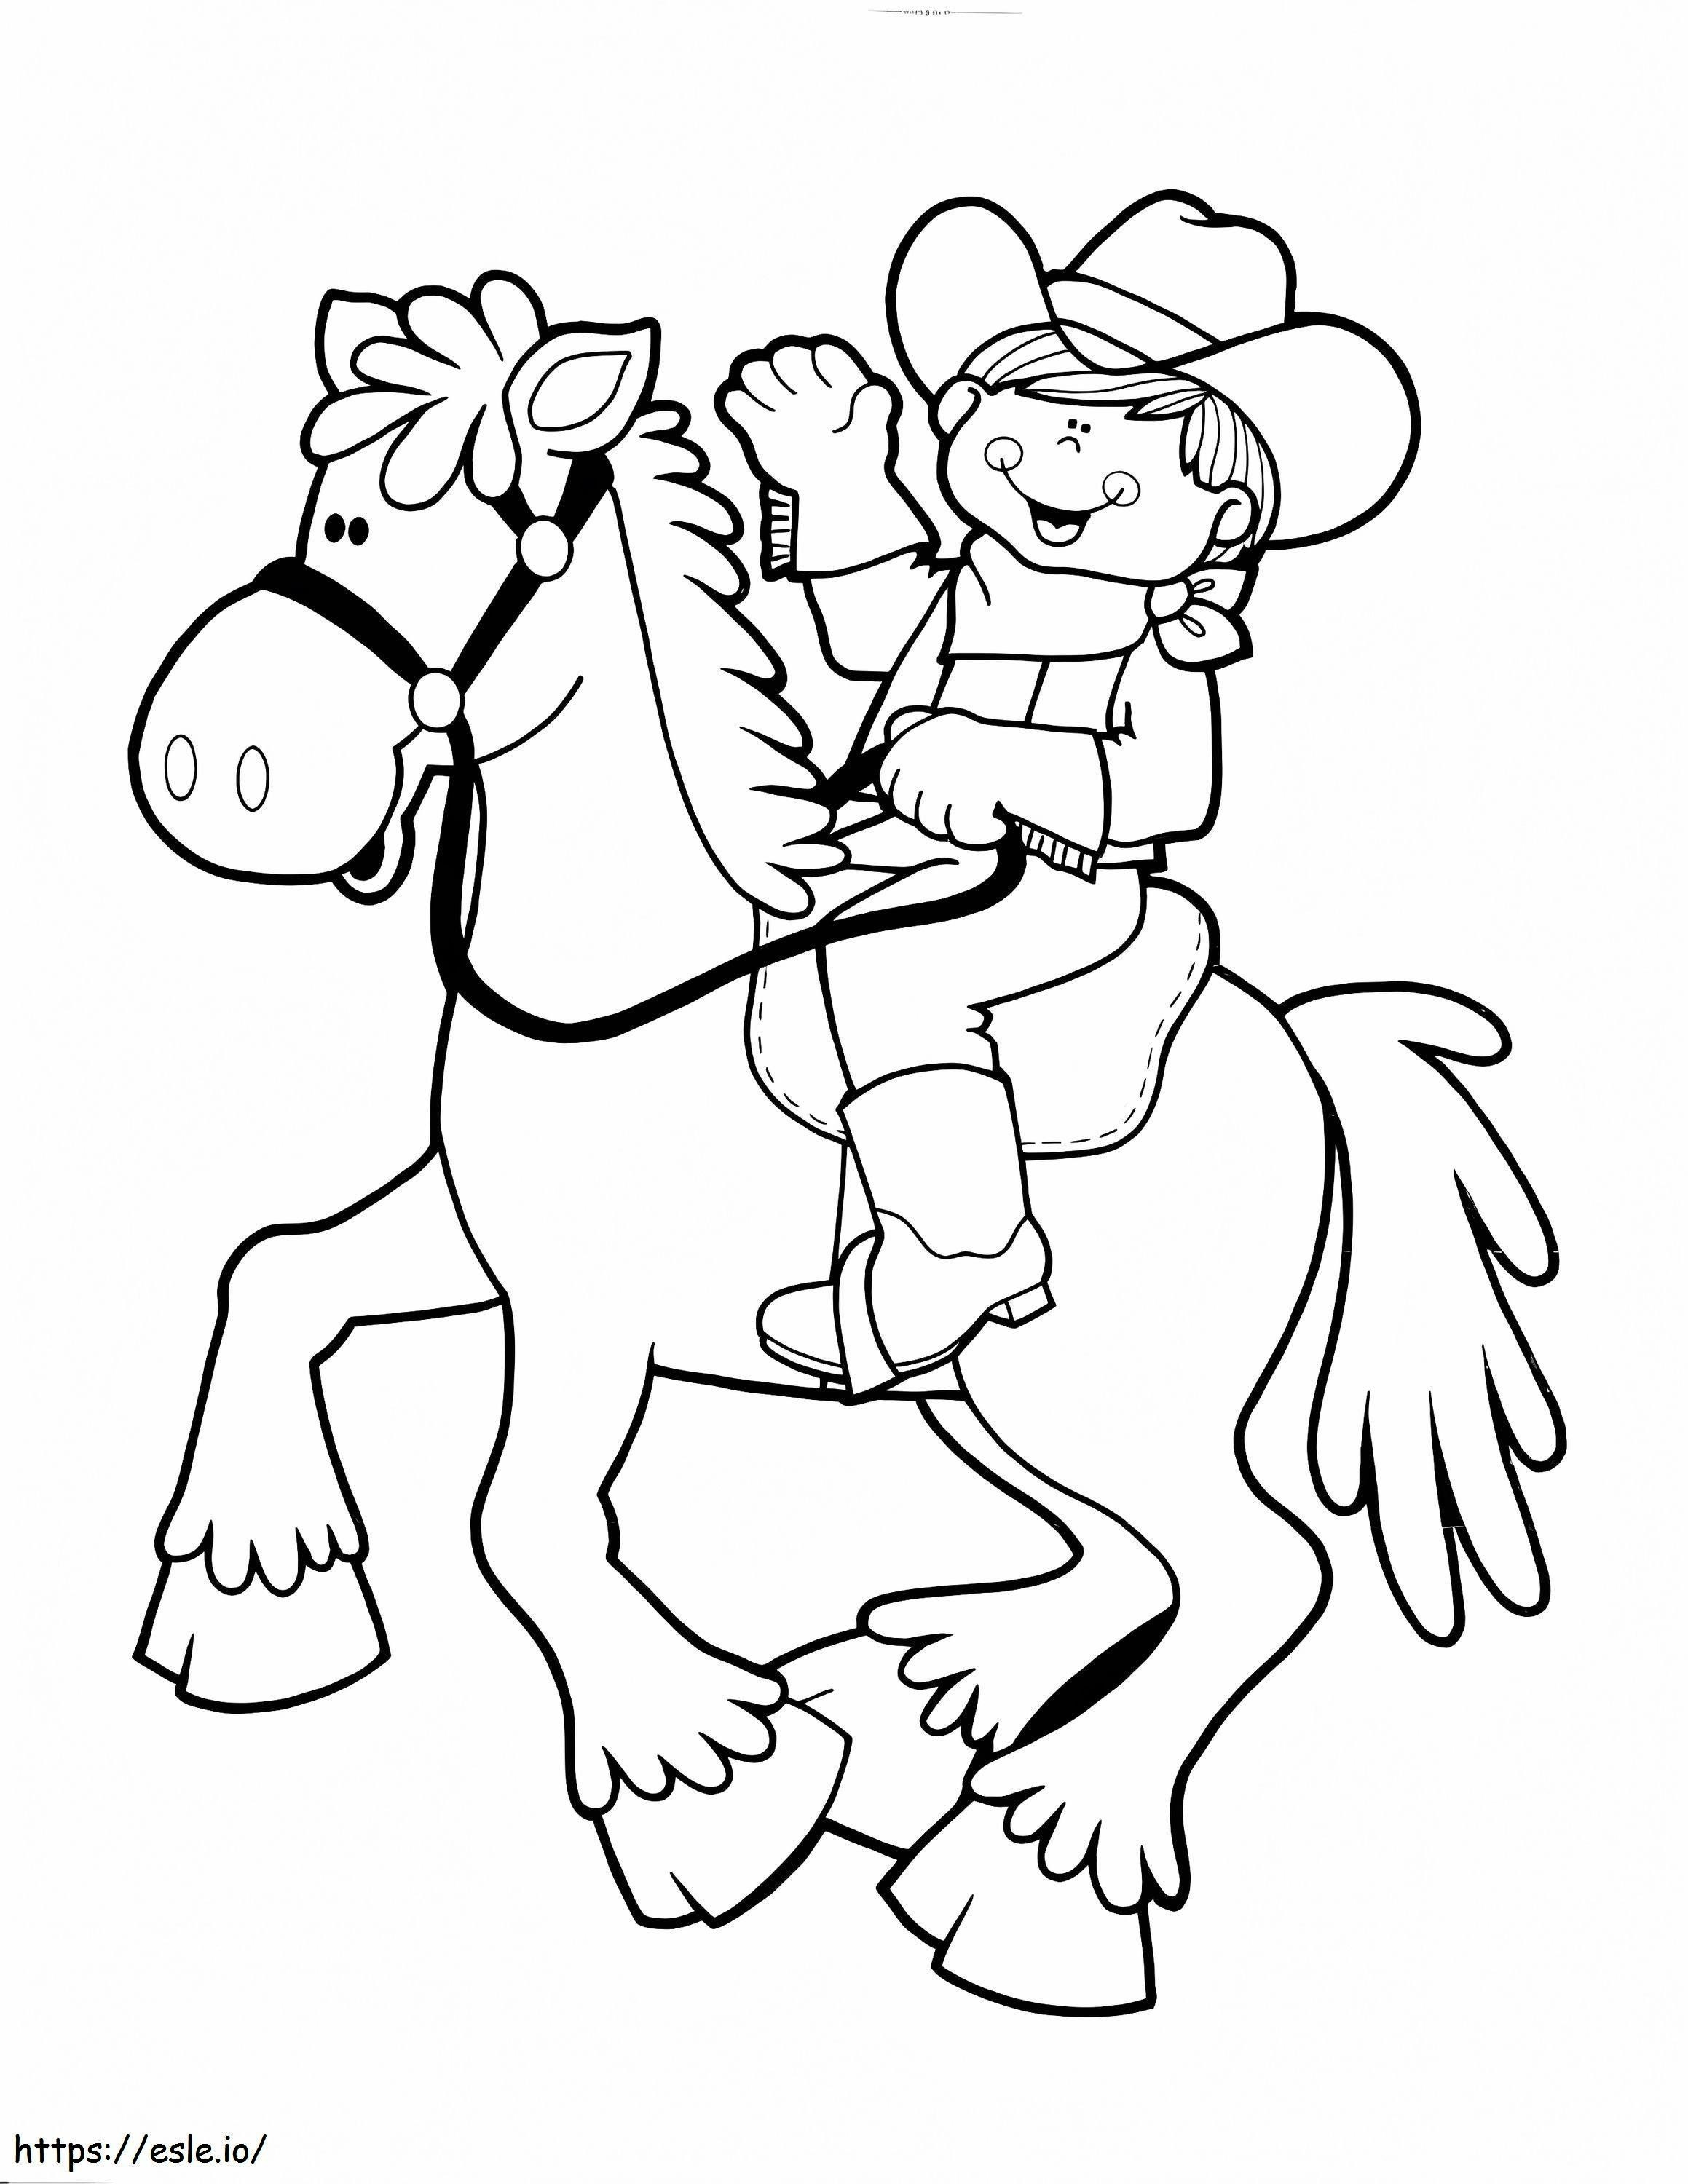 Cute Cowgirl coloring page